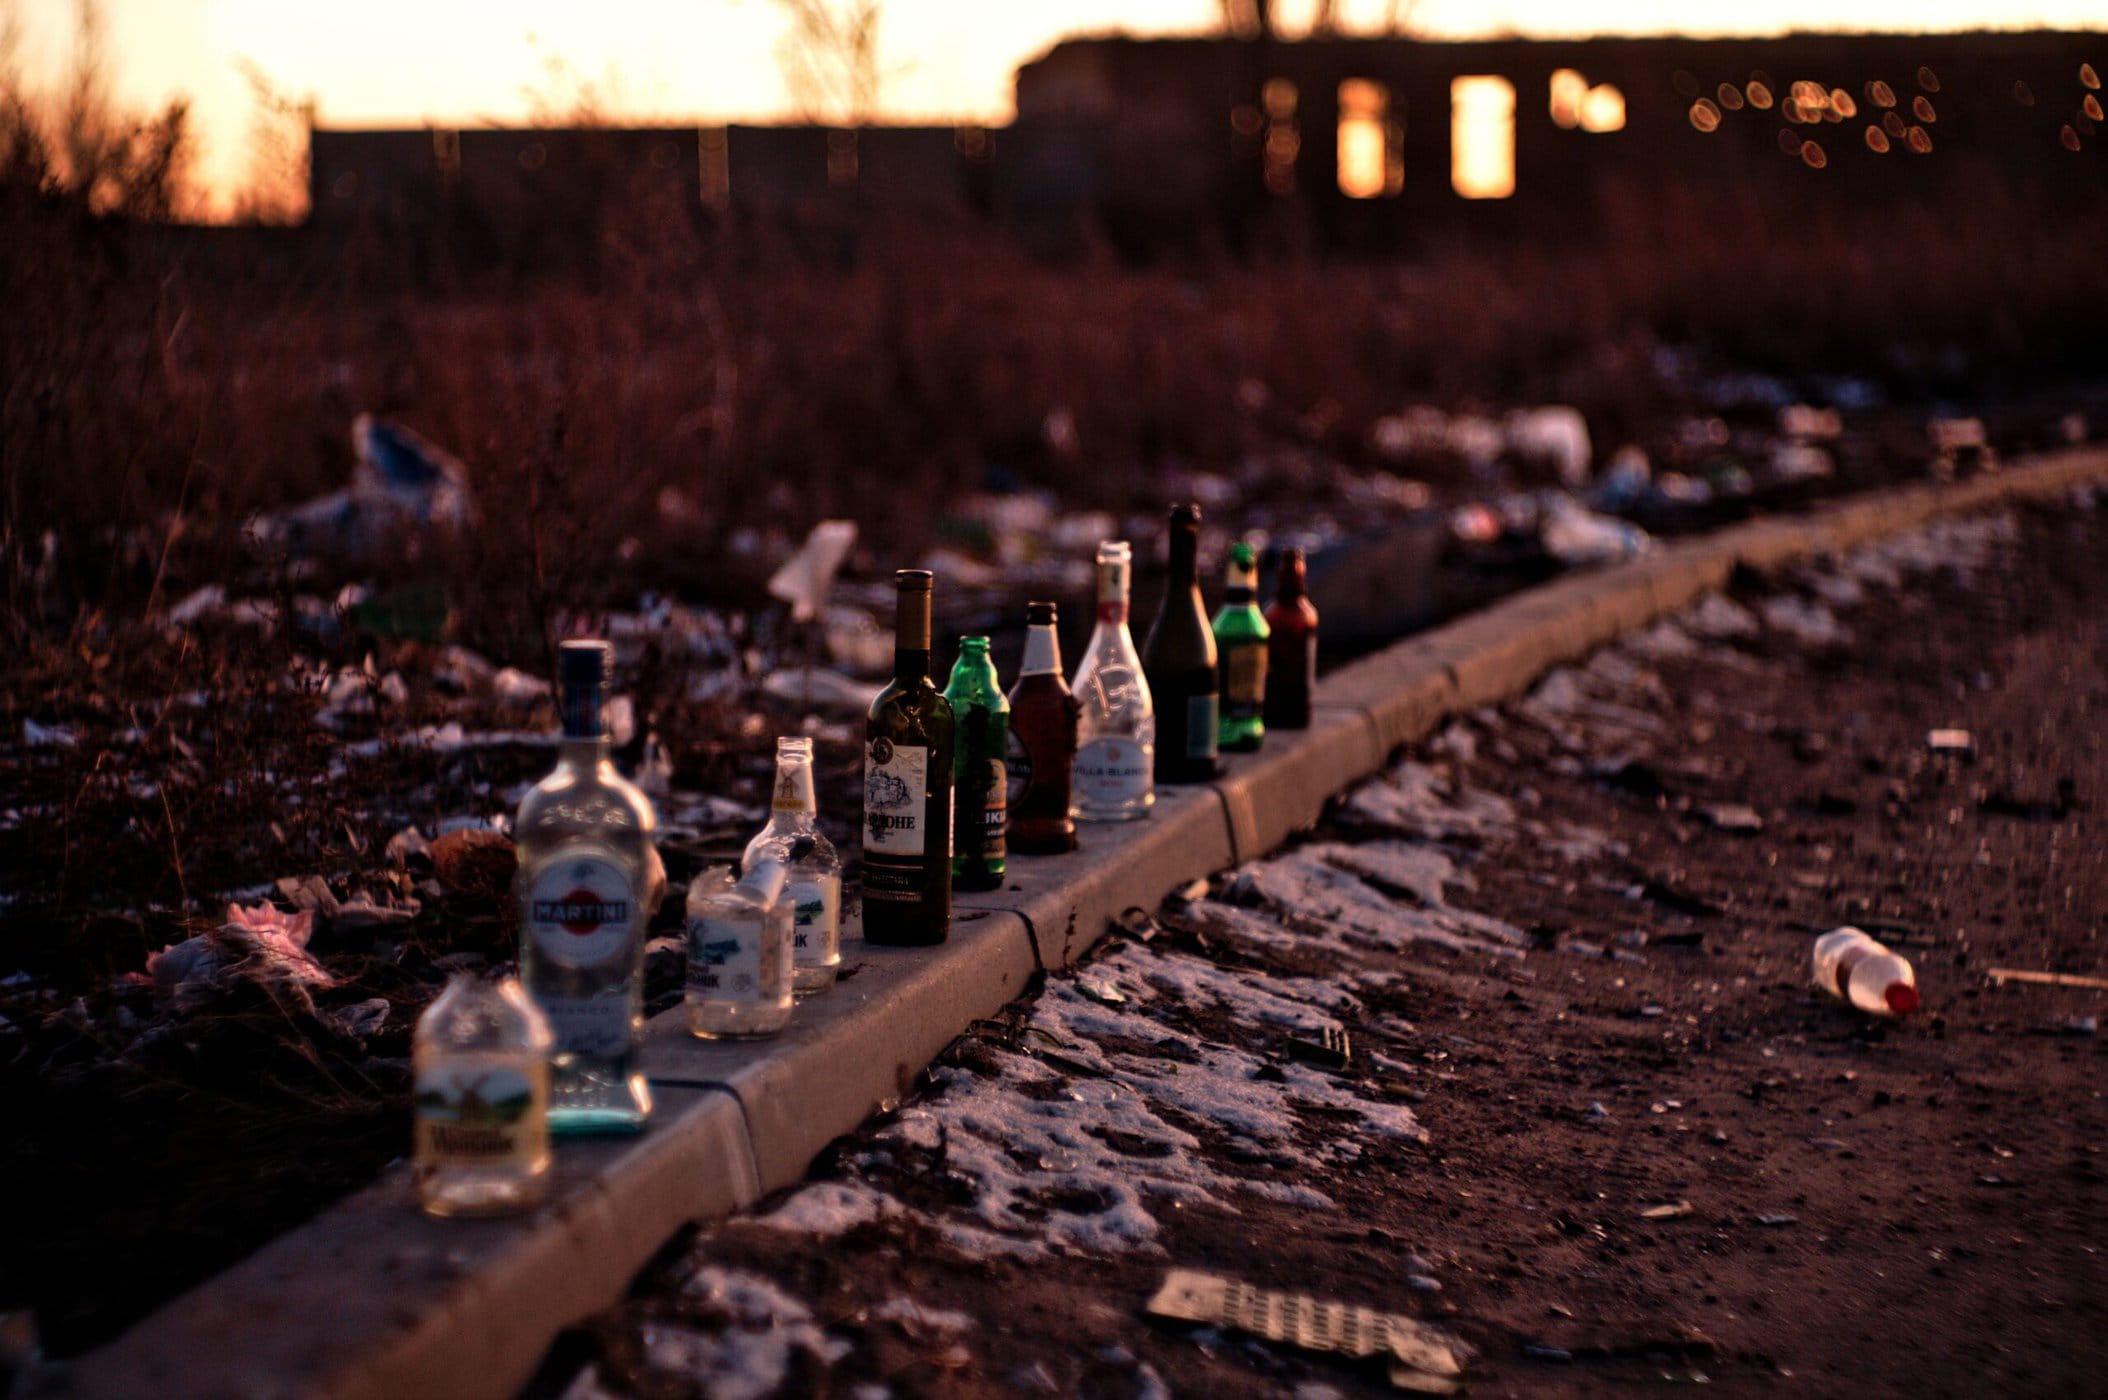 An image of alcohol bottles on the ground.